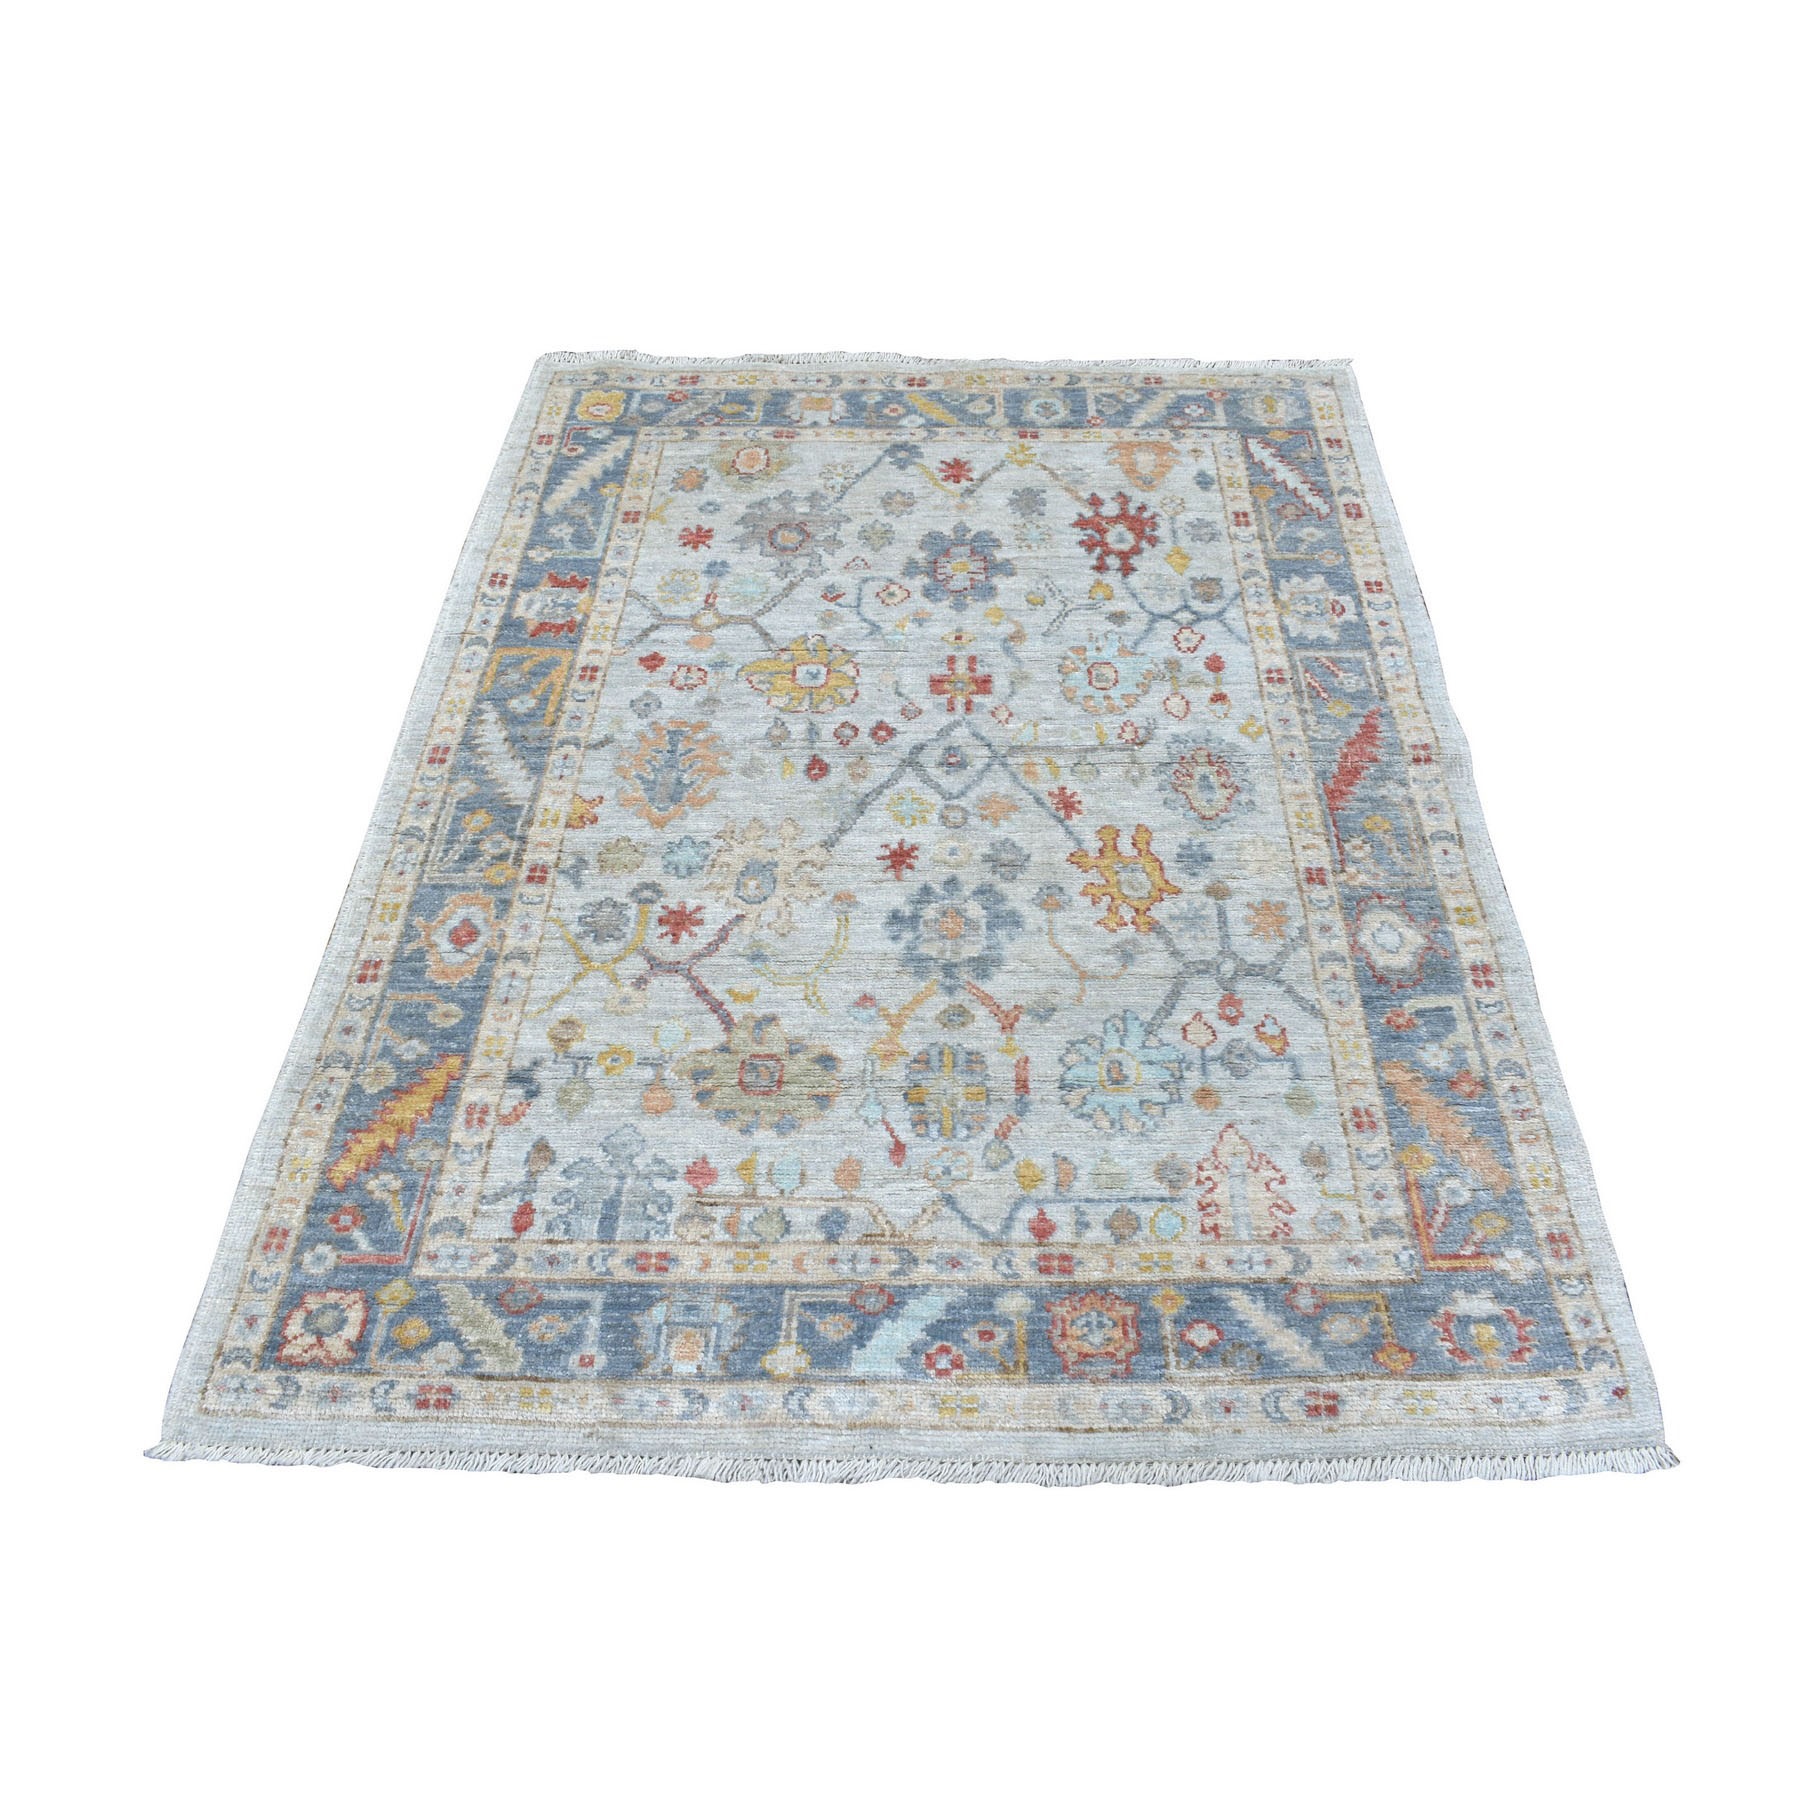 4'1"x5'8" Pure Wool Hand Woven Light Gray With Colorful Motifs Angora Oushak Oriental Rug 